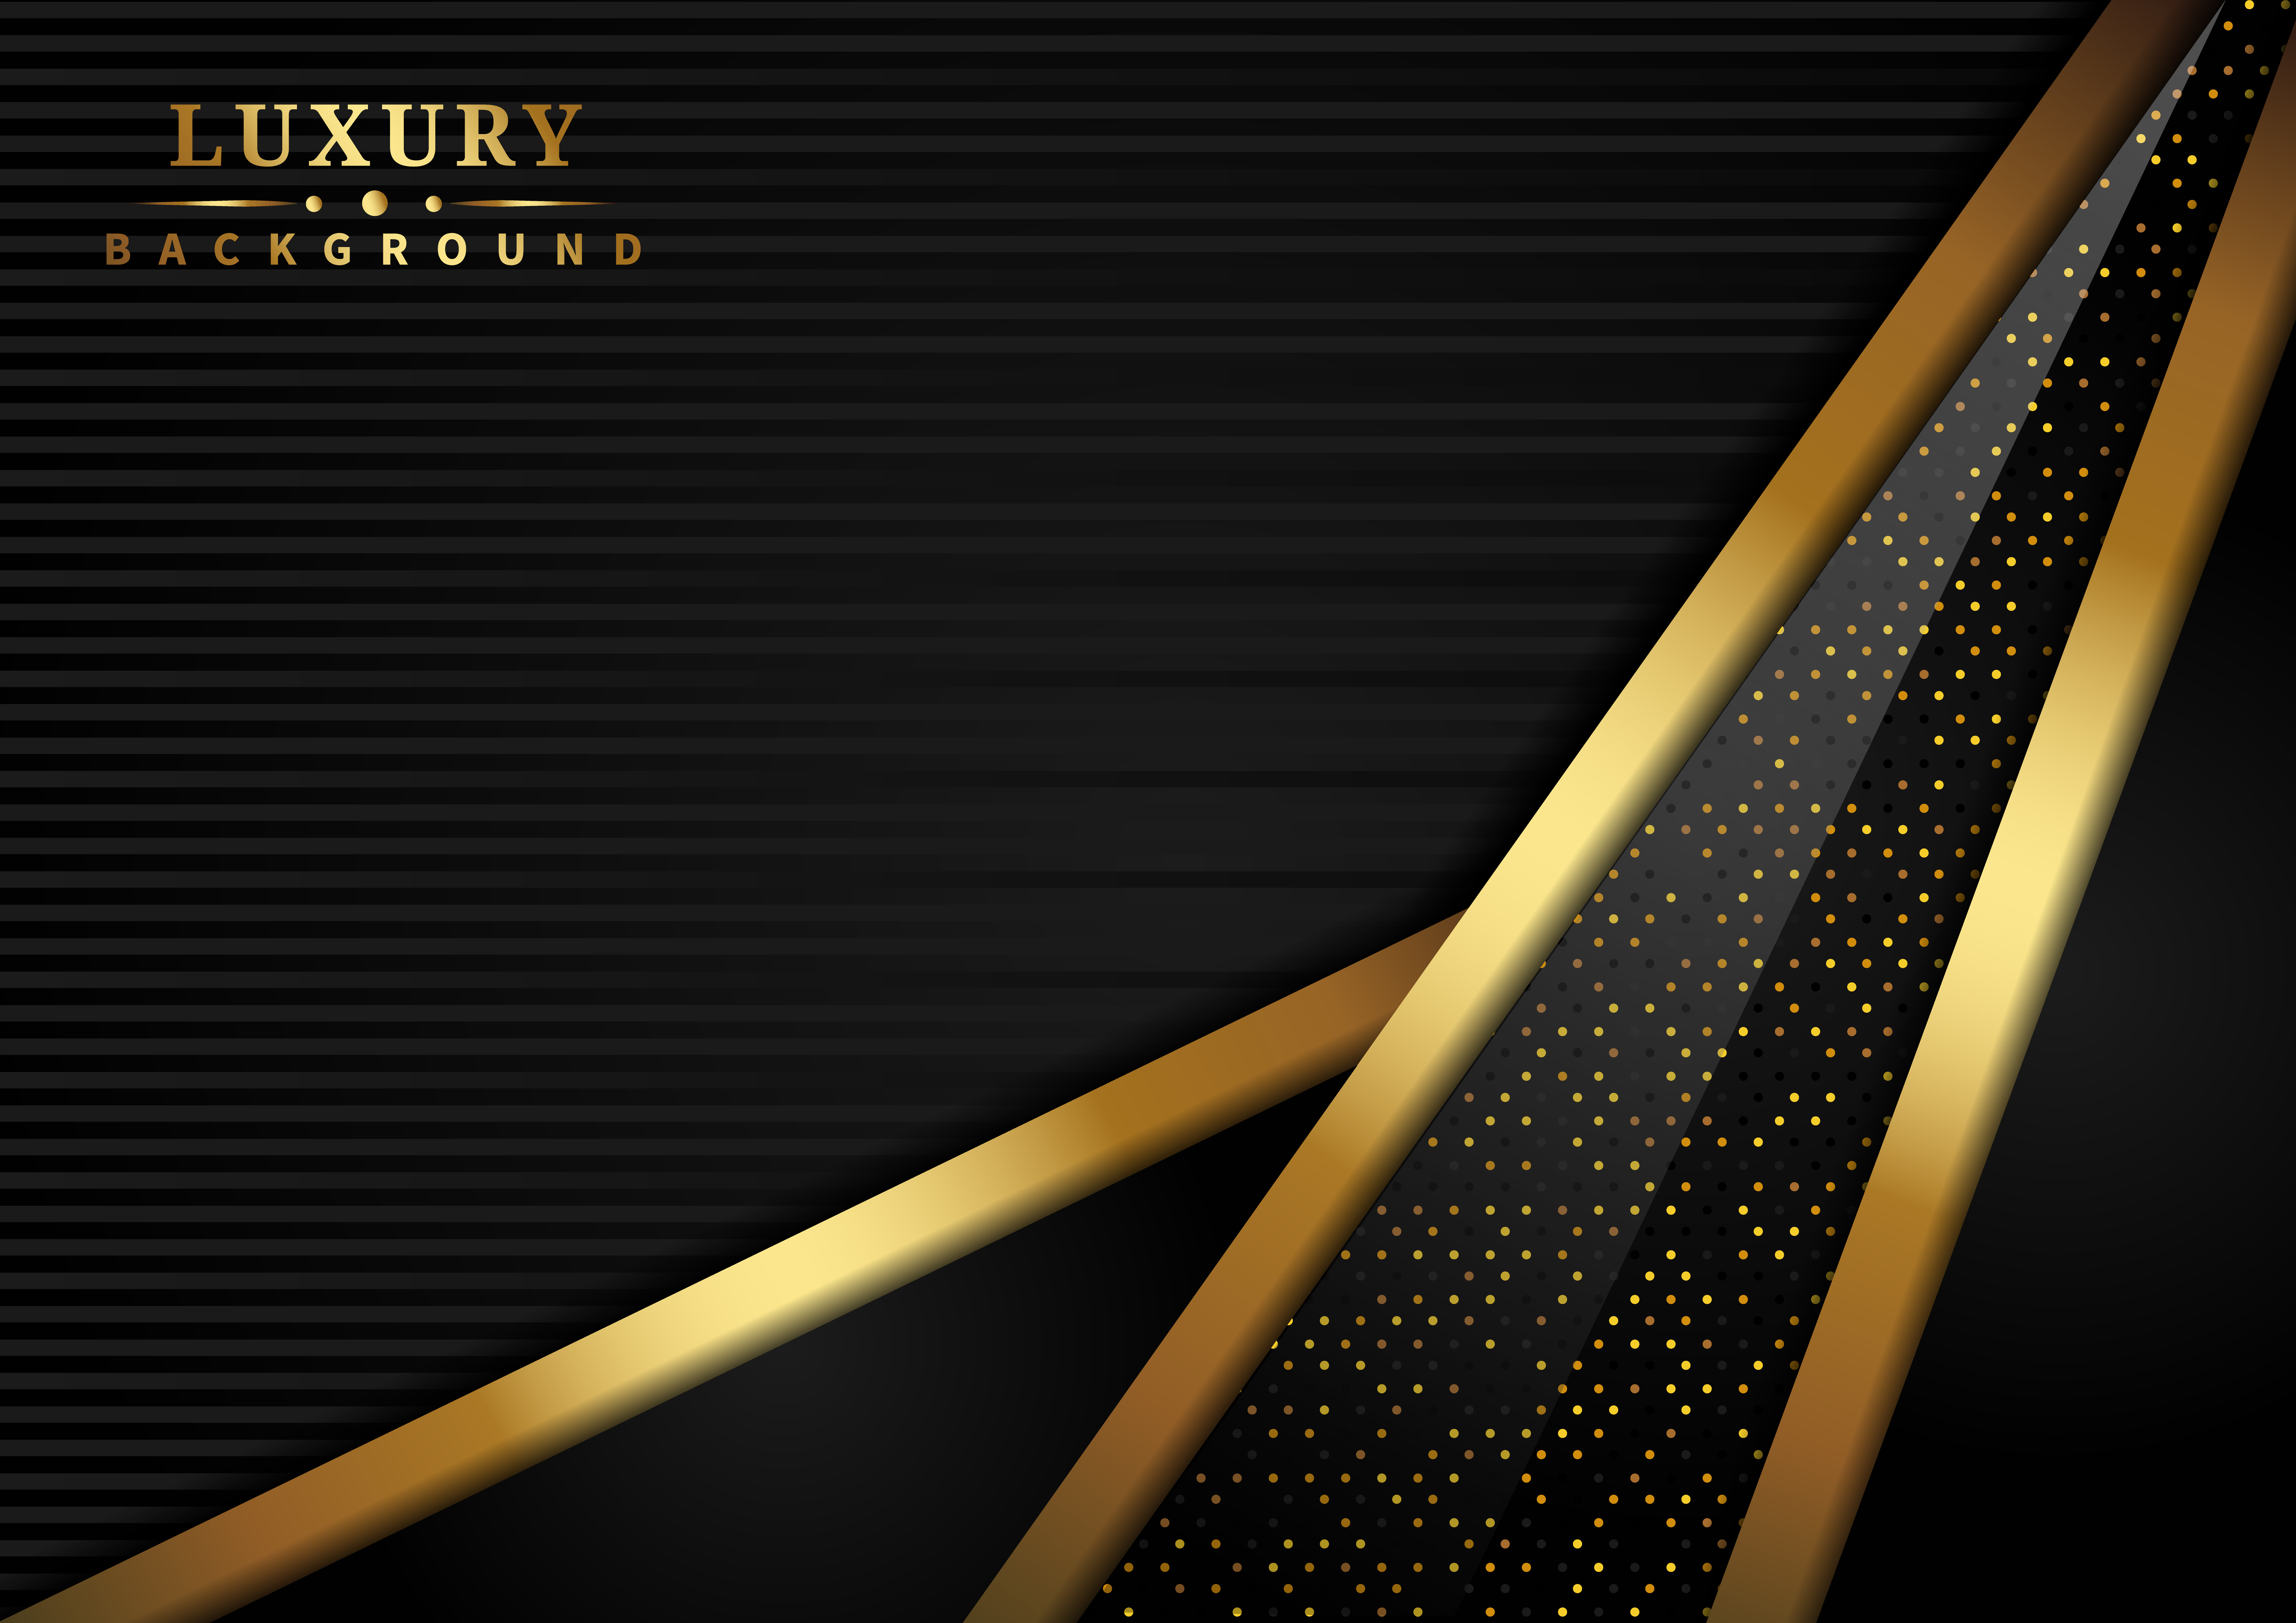 Abstract Luxury Triangle Overlapping Black And Gold Layer Background